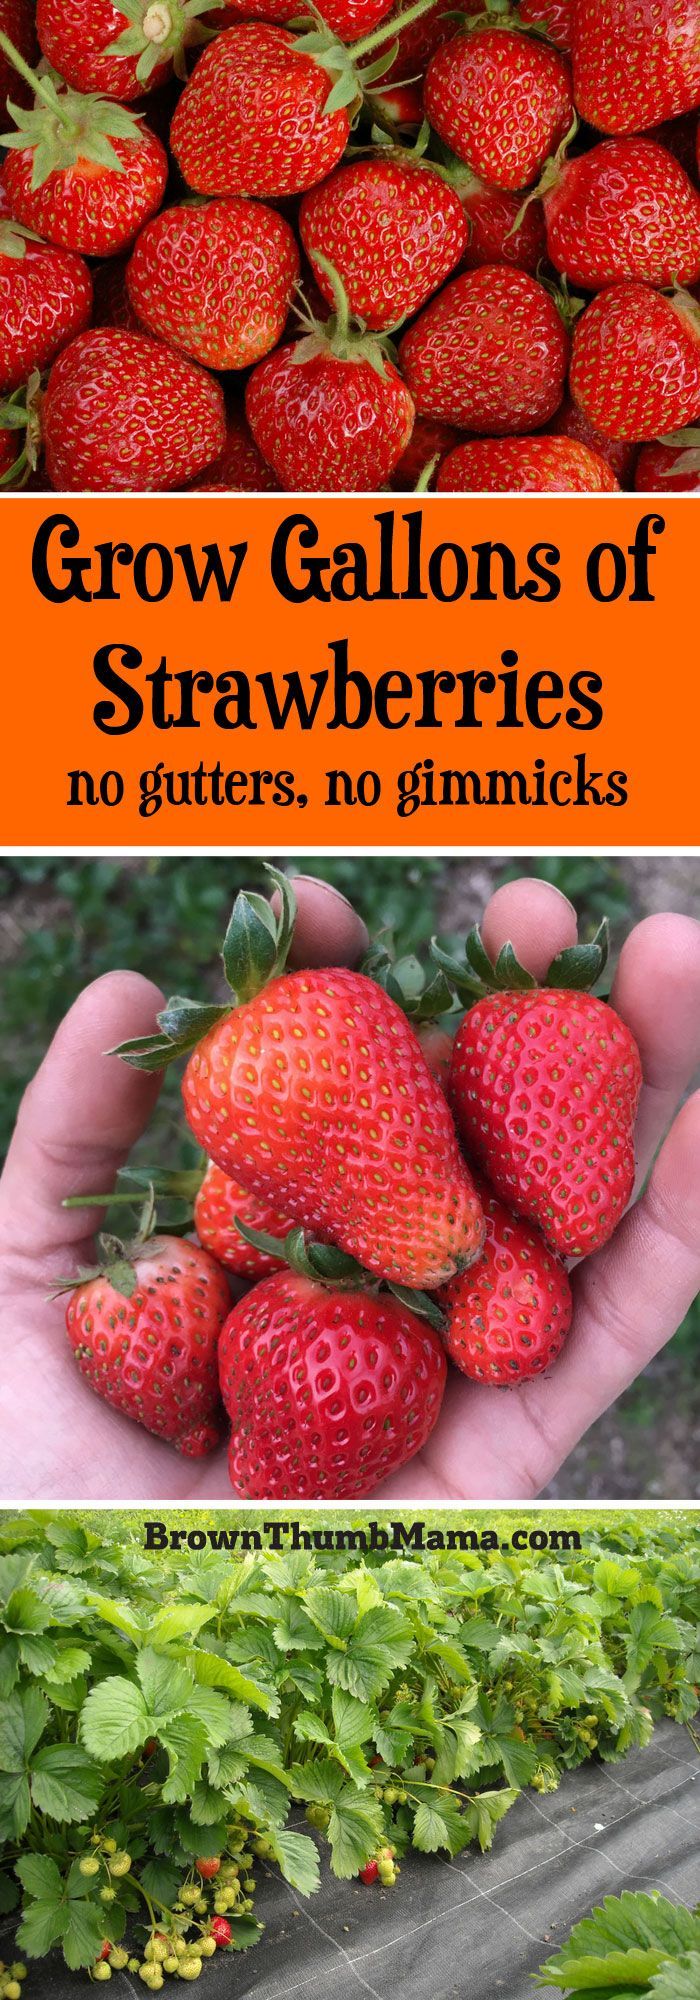 Grow Gallons of Strawberries -   21 container garden strawberries
 ideas